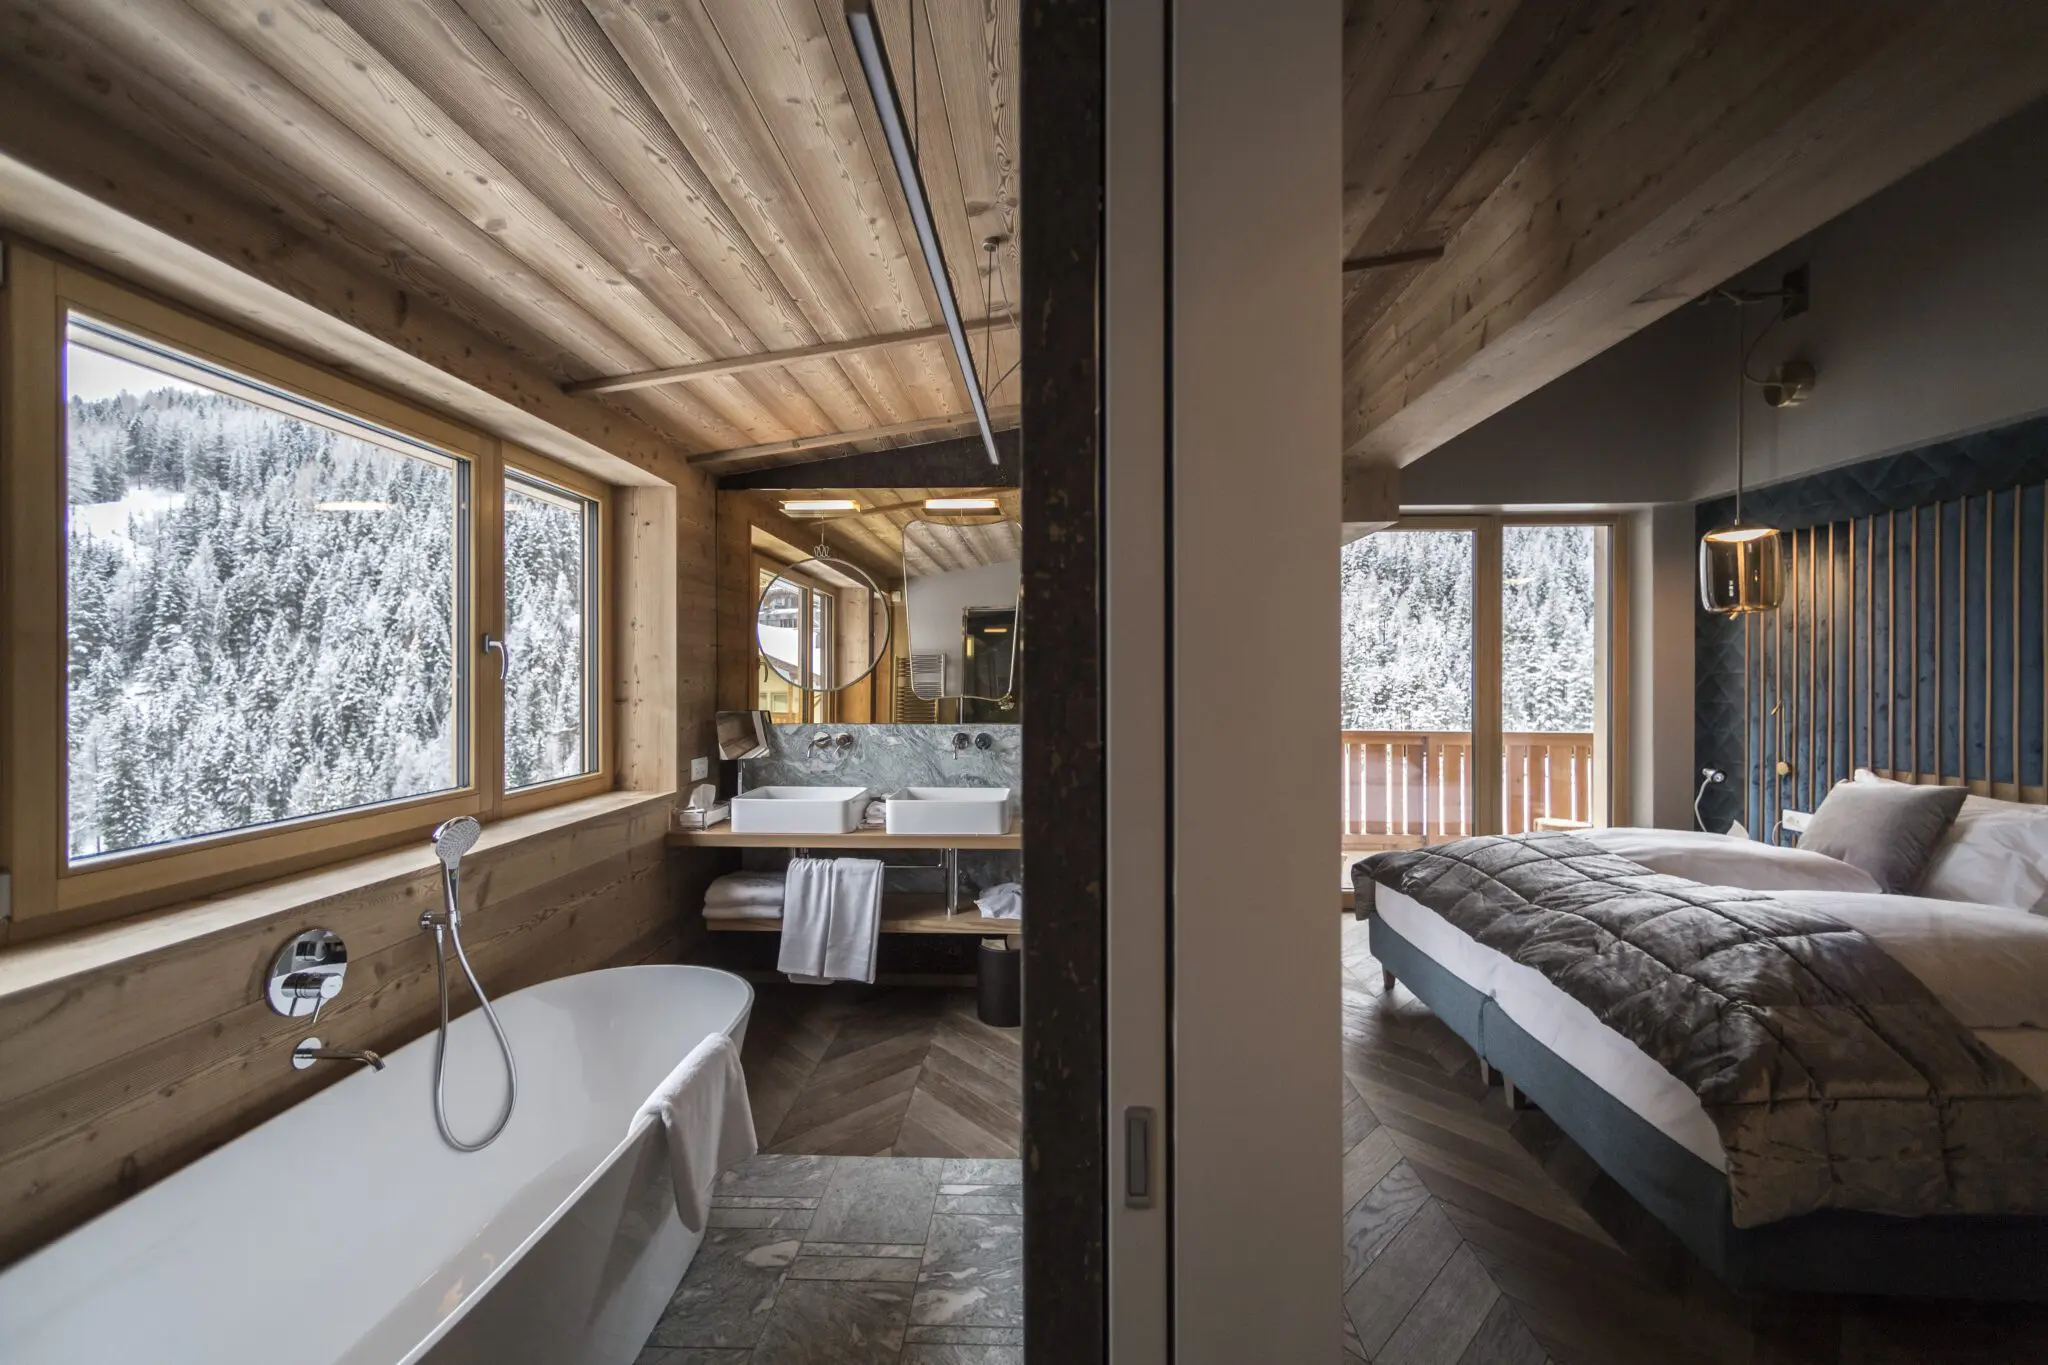 Nest Italy: Penthouse Suite in San Cassiano